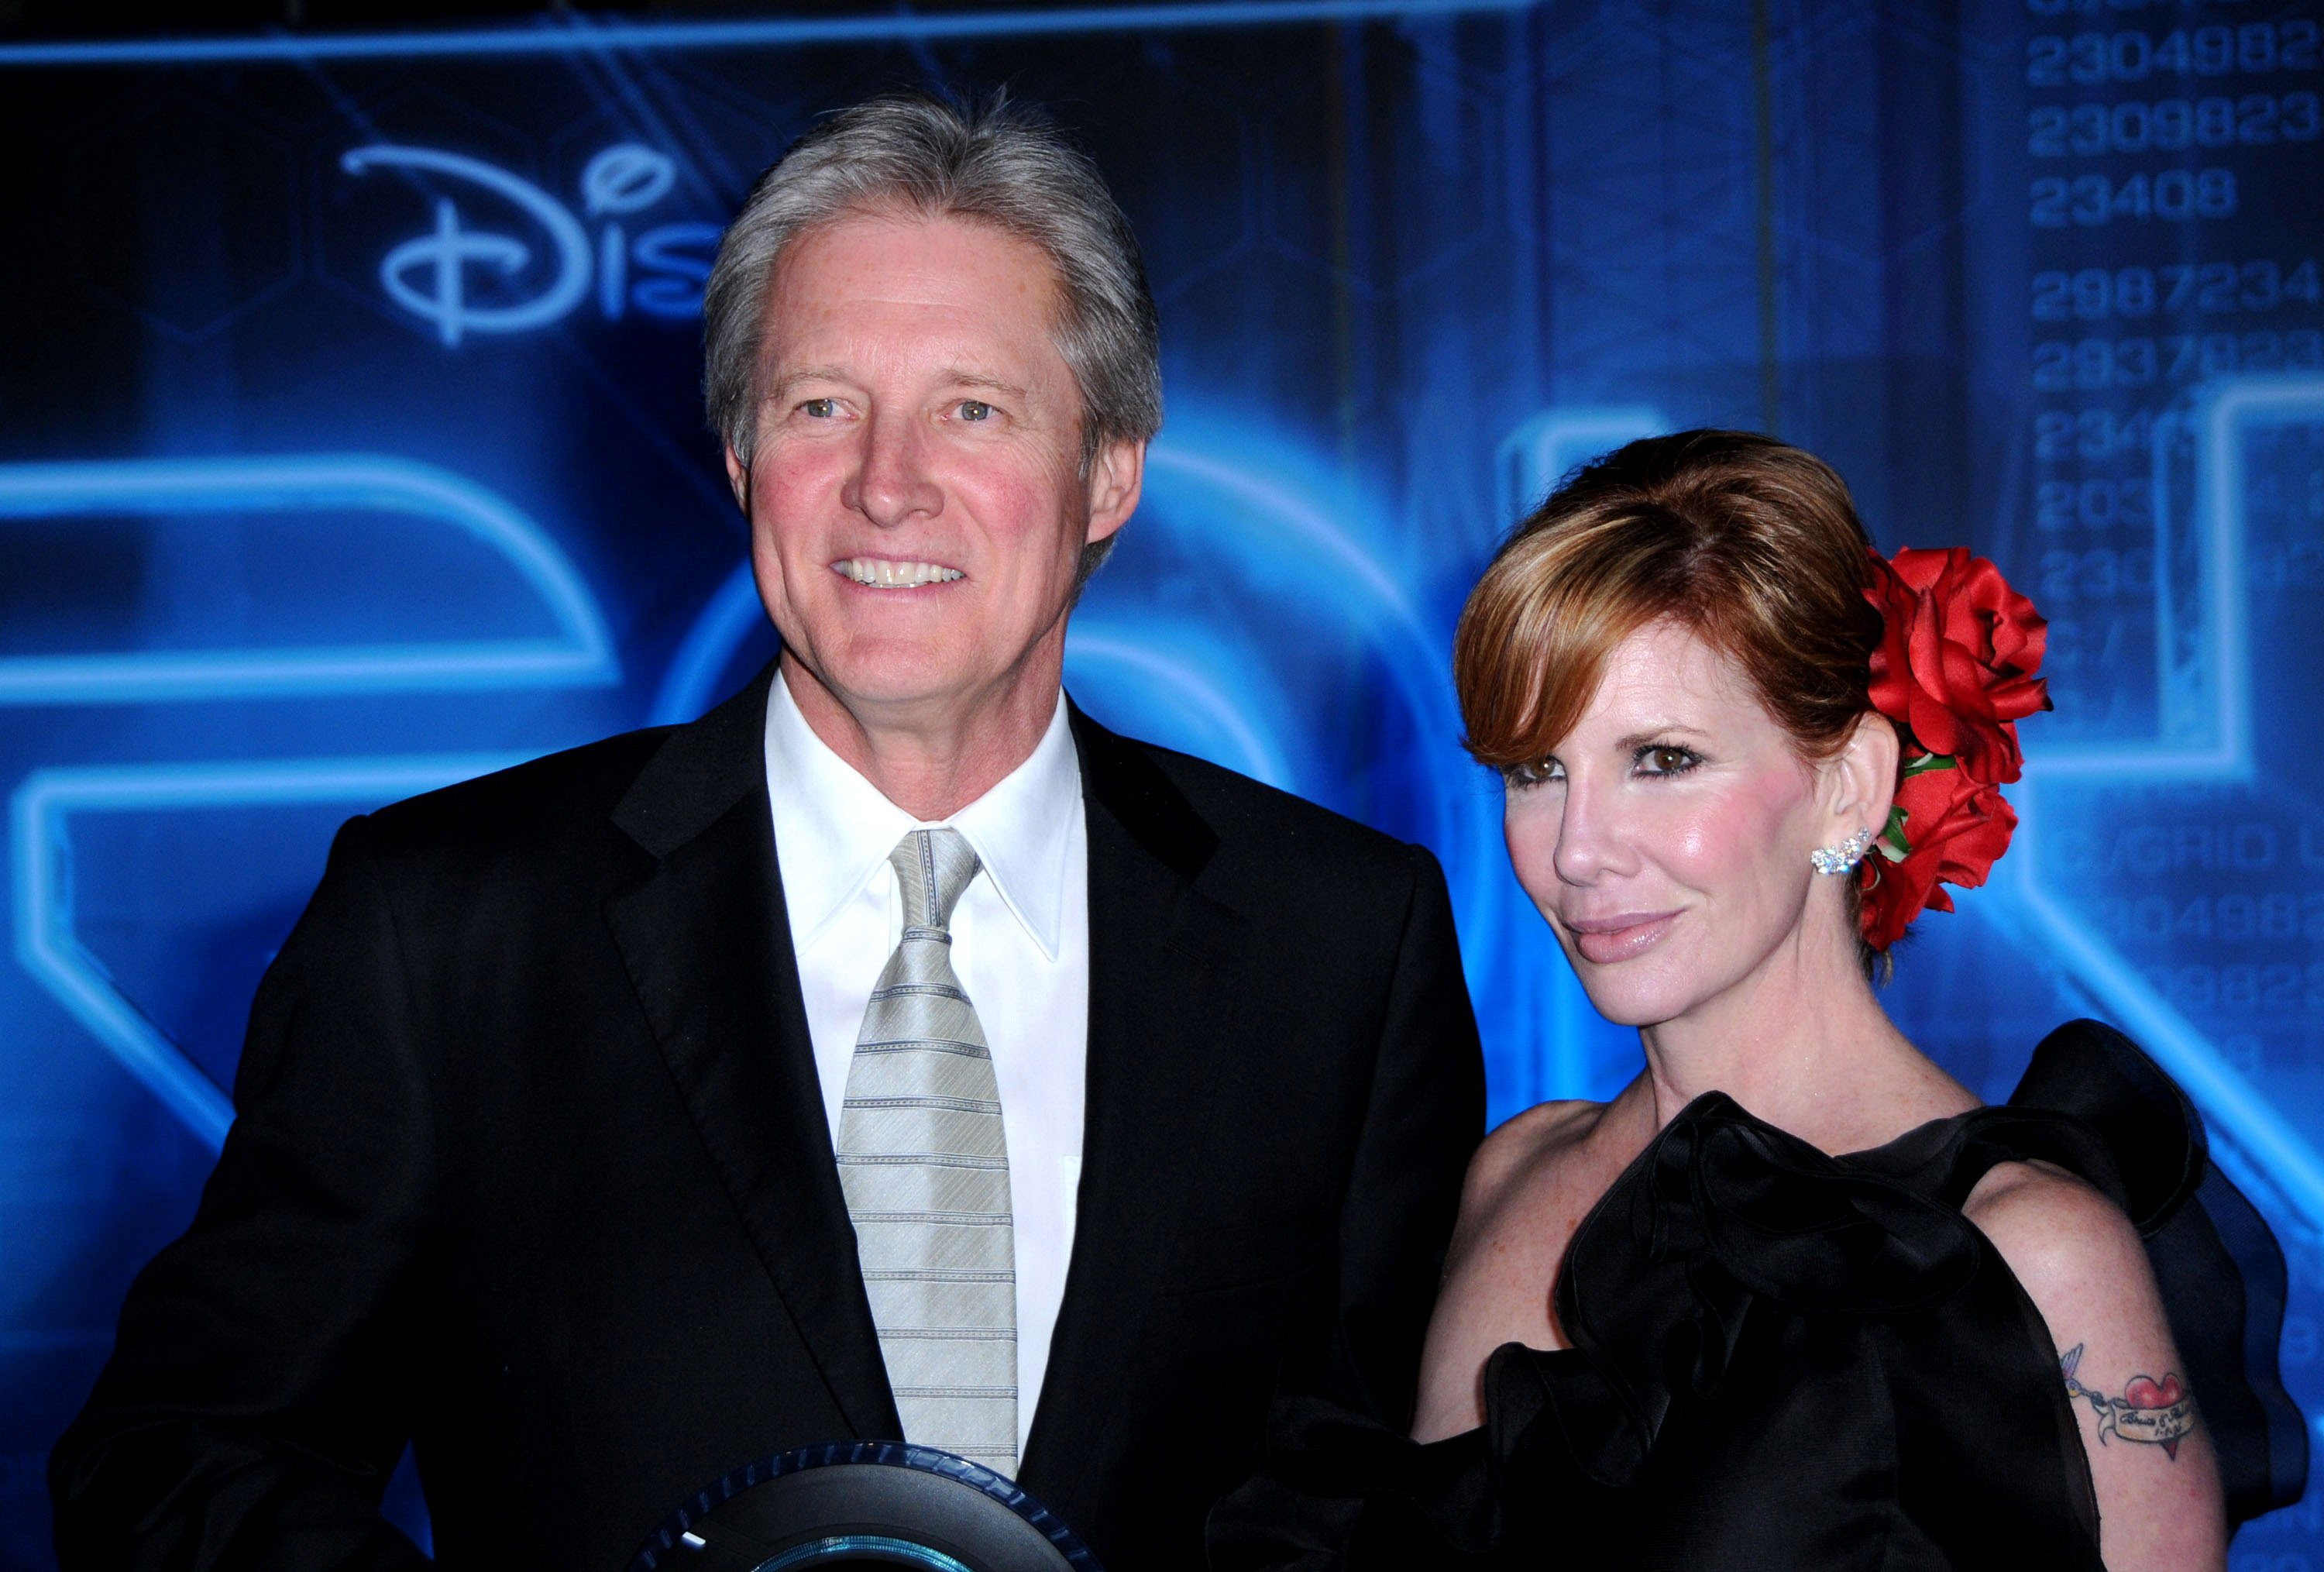 Melissa Gilbert in a black dress and Boxleitner in a black suit.